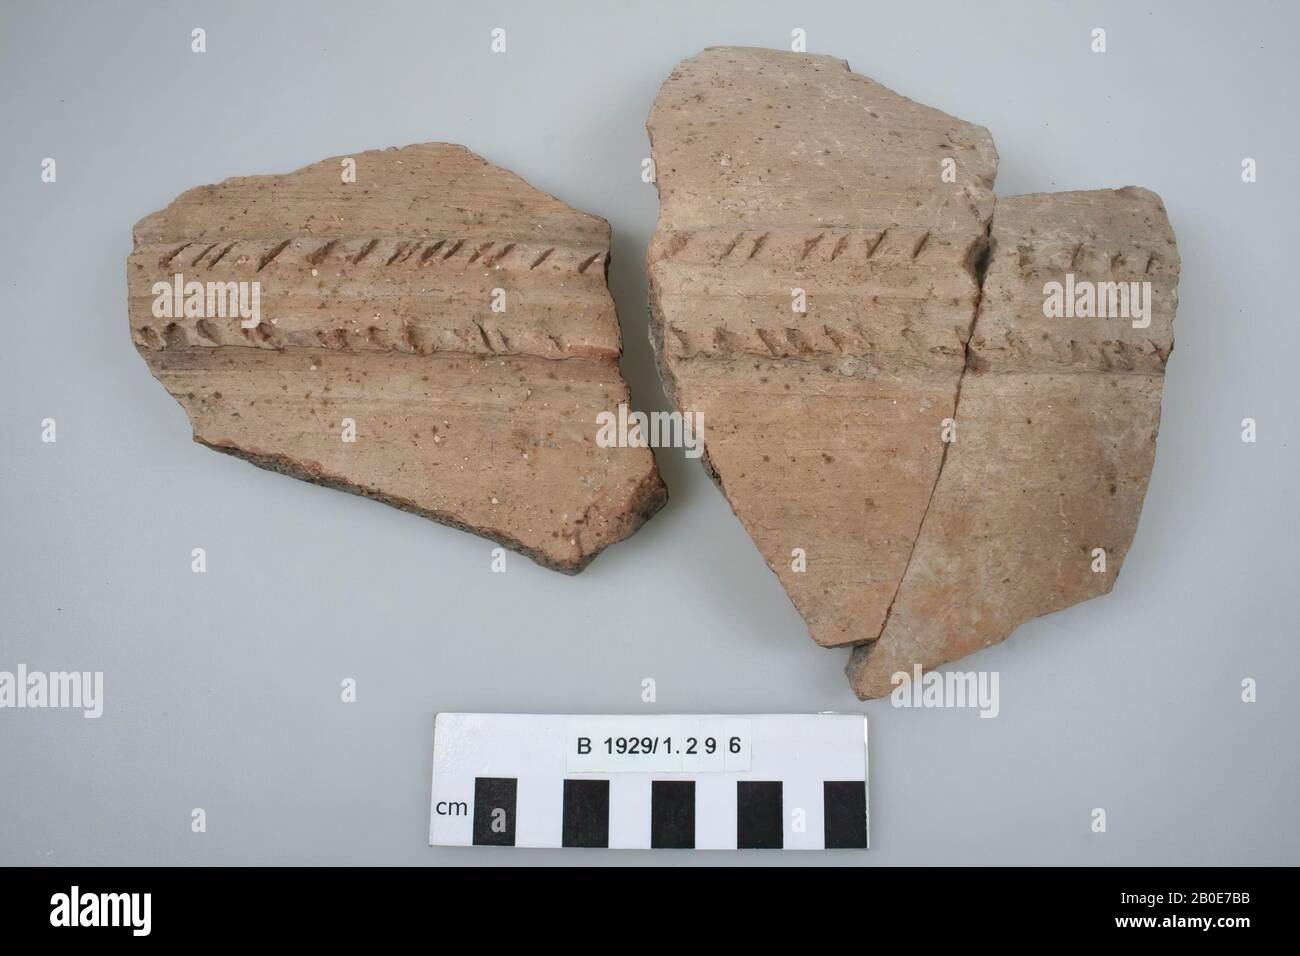 A wall shard of a crater with a scratched herringbone pattern, crockery, earthenware, B 25.5 cm, Palestine Stock Photo